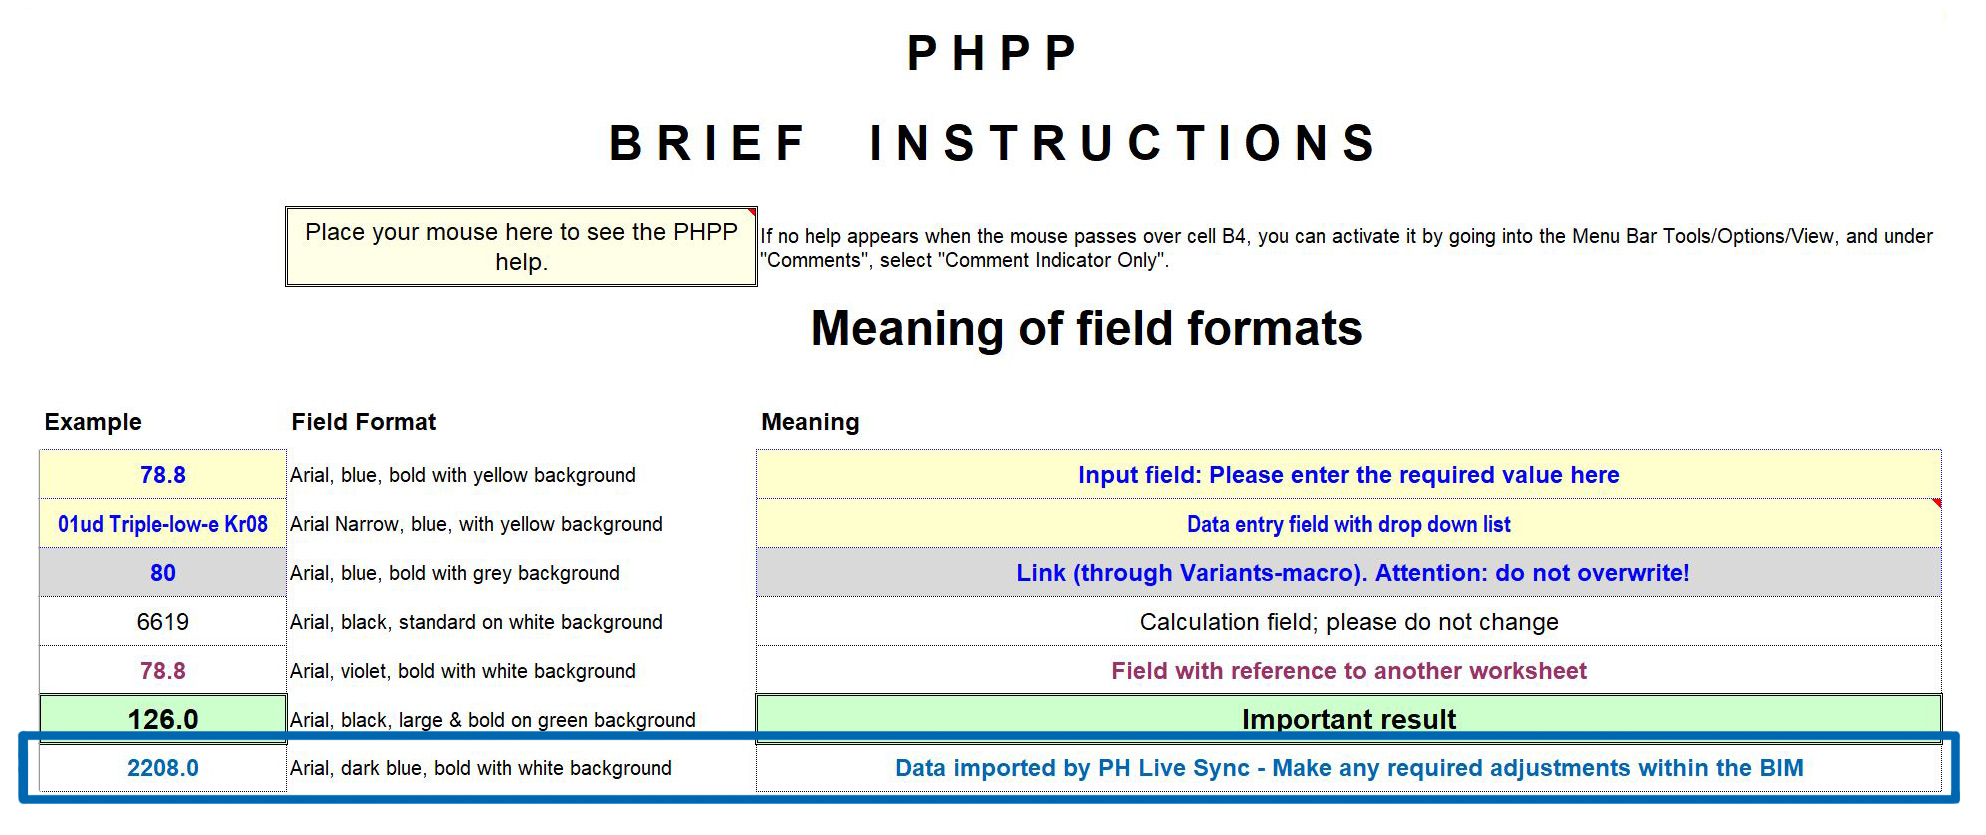 PH Live Sync Field Formatting in PHPP